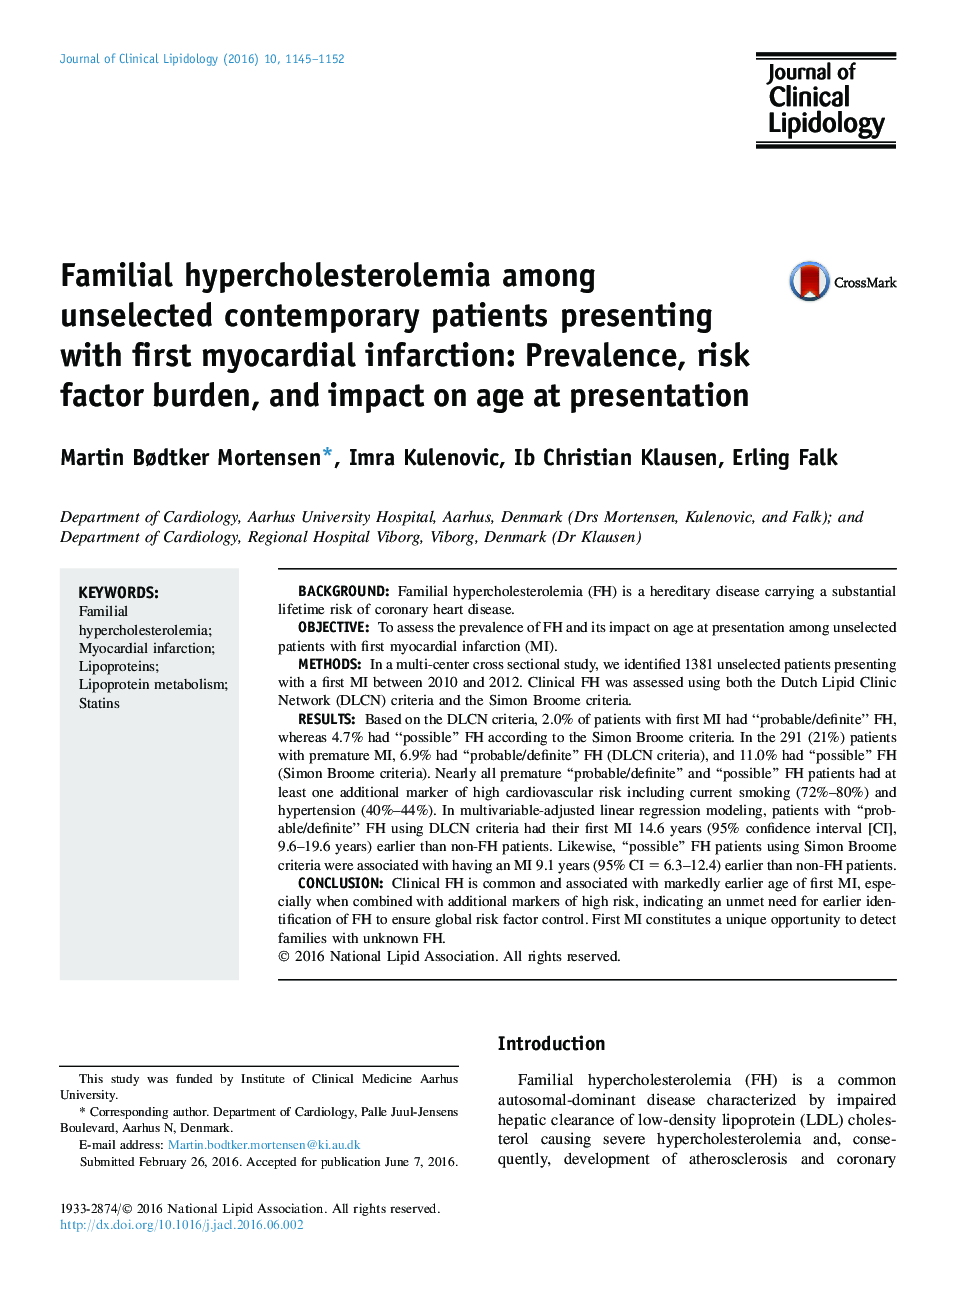 Familial hypercholesterolemia among unselected contemporary patients presenting with first myocardial infarction: Prevalence, risk factor burden, and impact on age at presentation